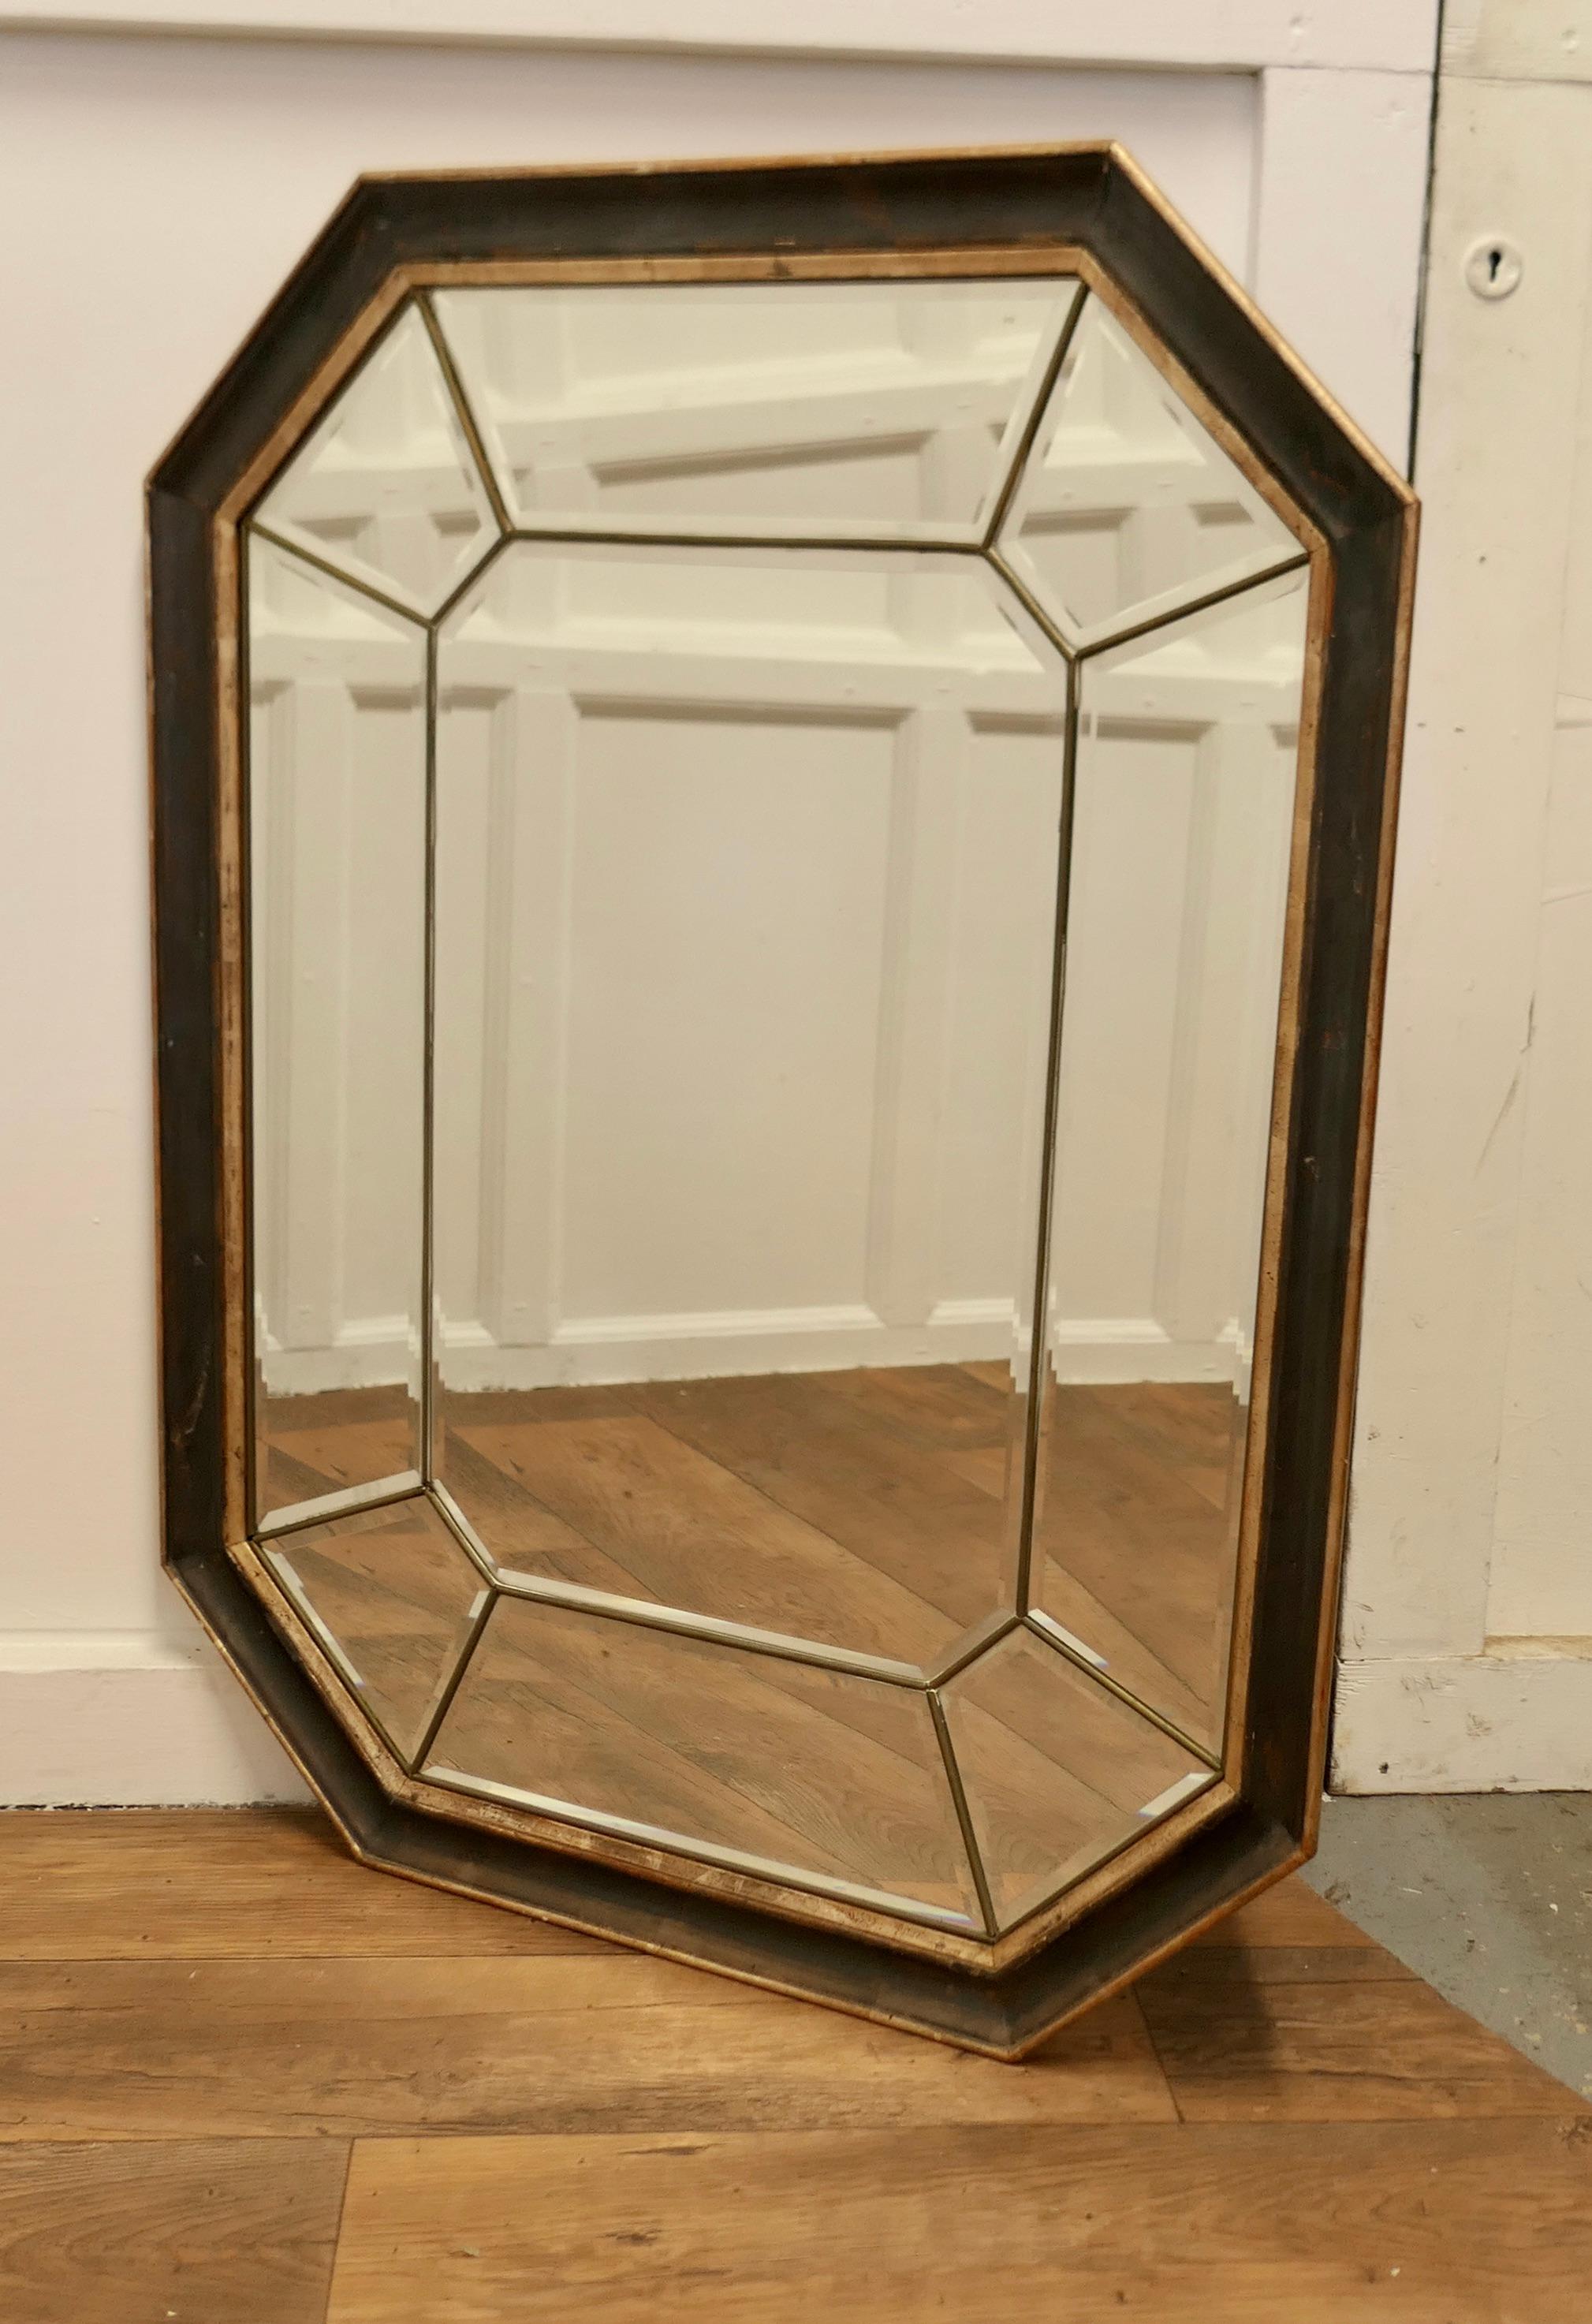 Large French Octagonal Cushion Mirror

This is a lovely and a fine quality cushion Mirror, the 9” frame takes a double form with the central mirror between brass edged mirrors which form a second frame
All the mirrors are bevelled, there is very